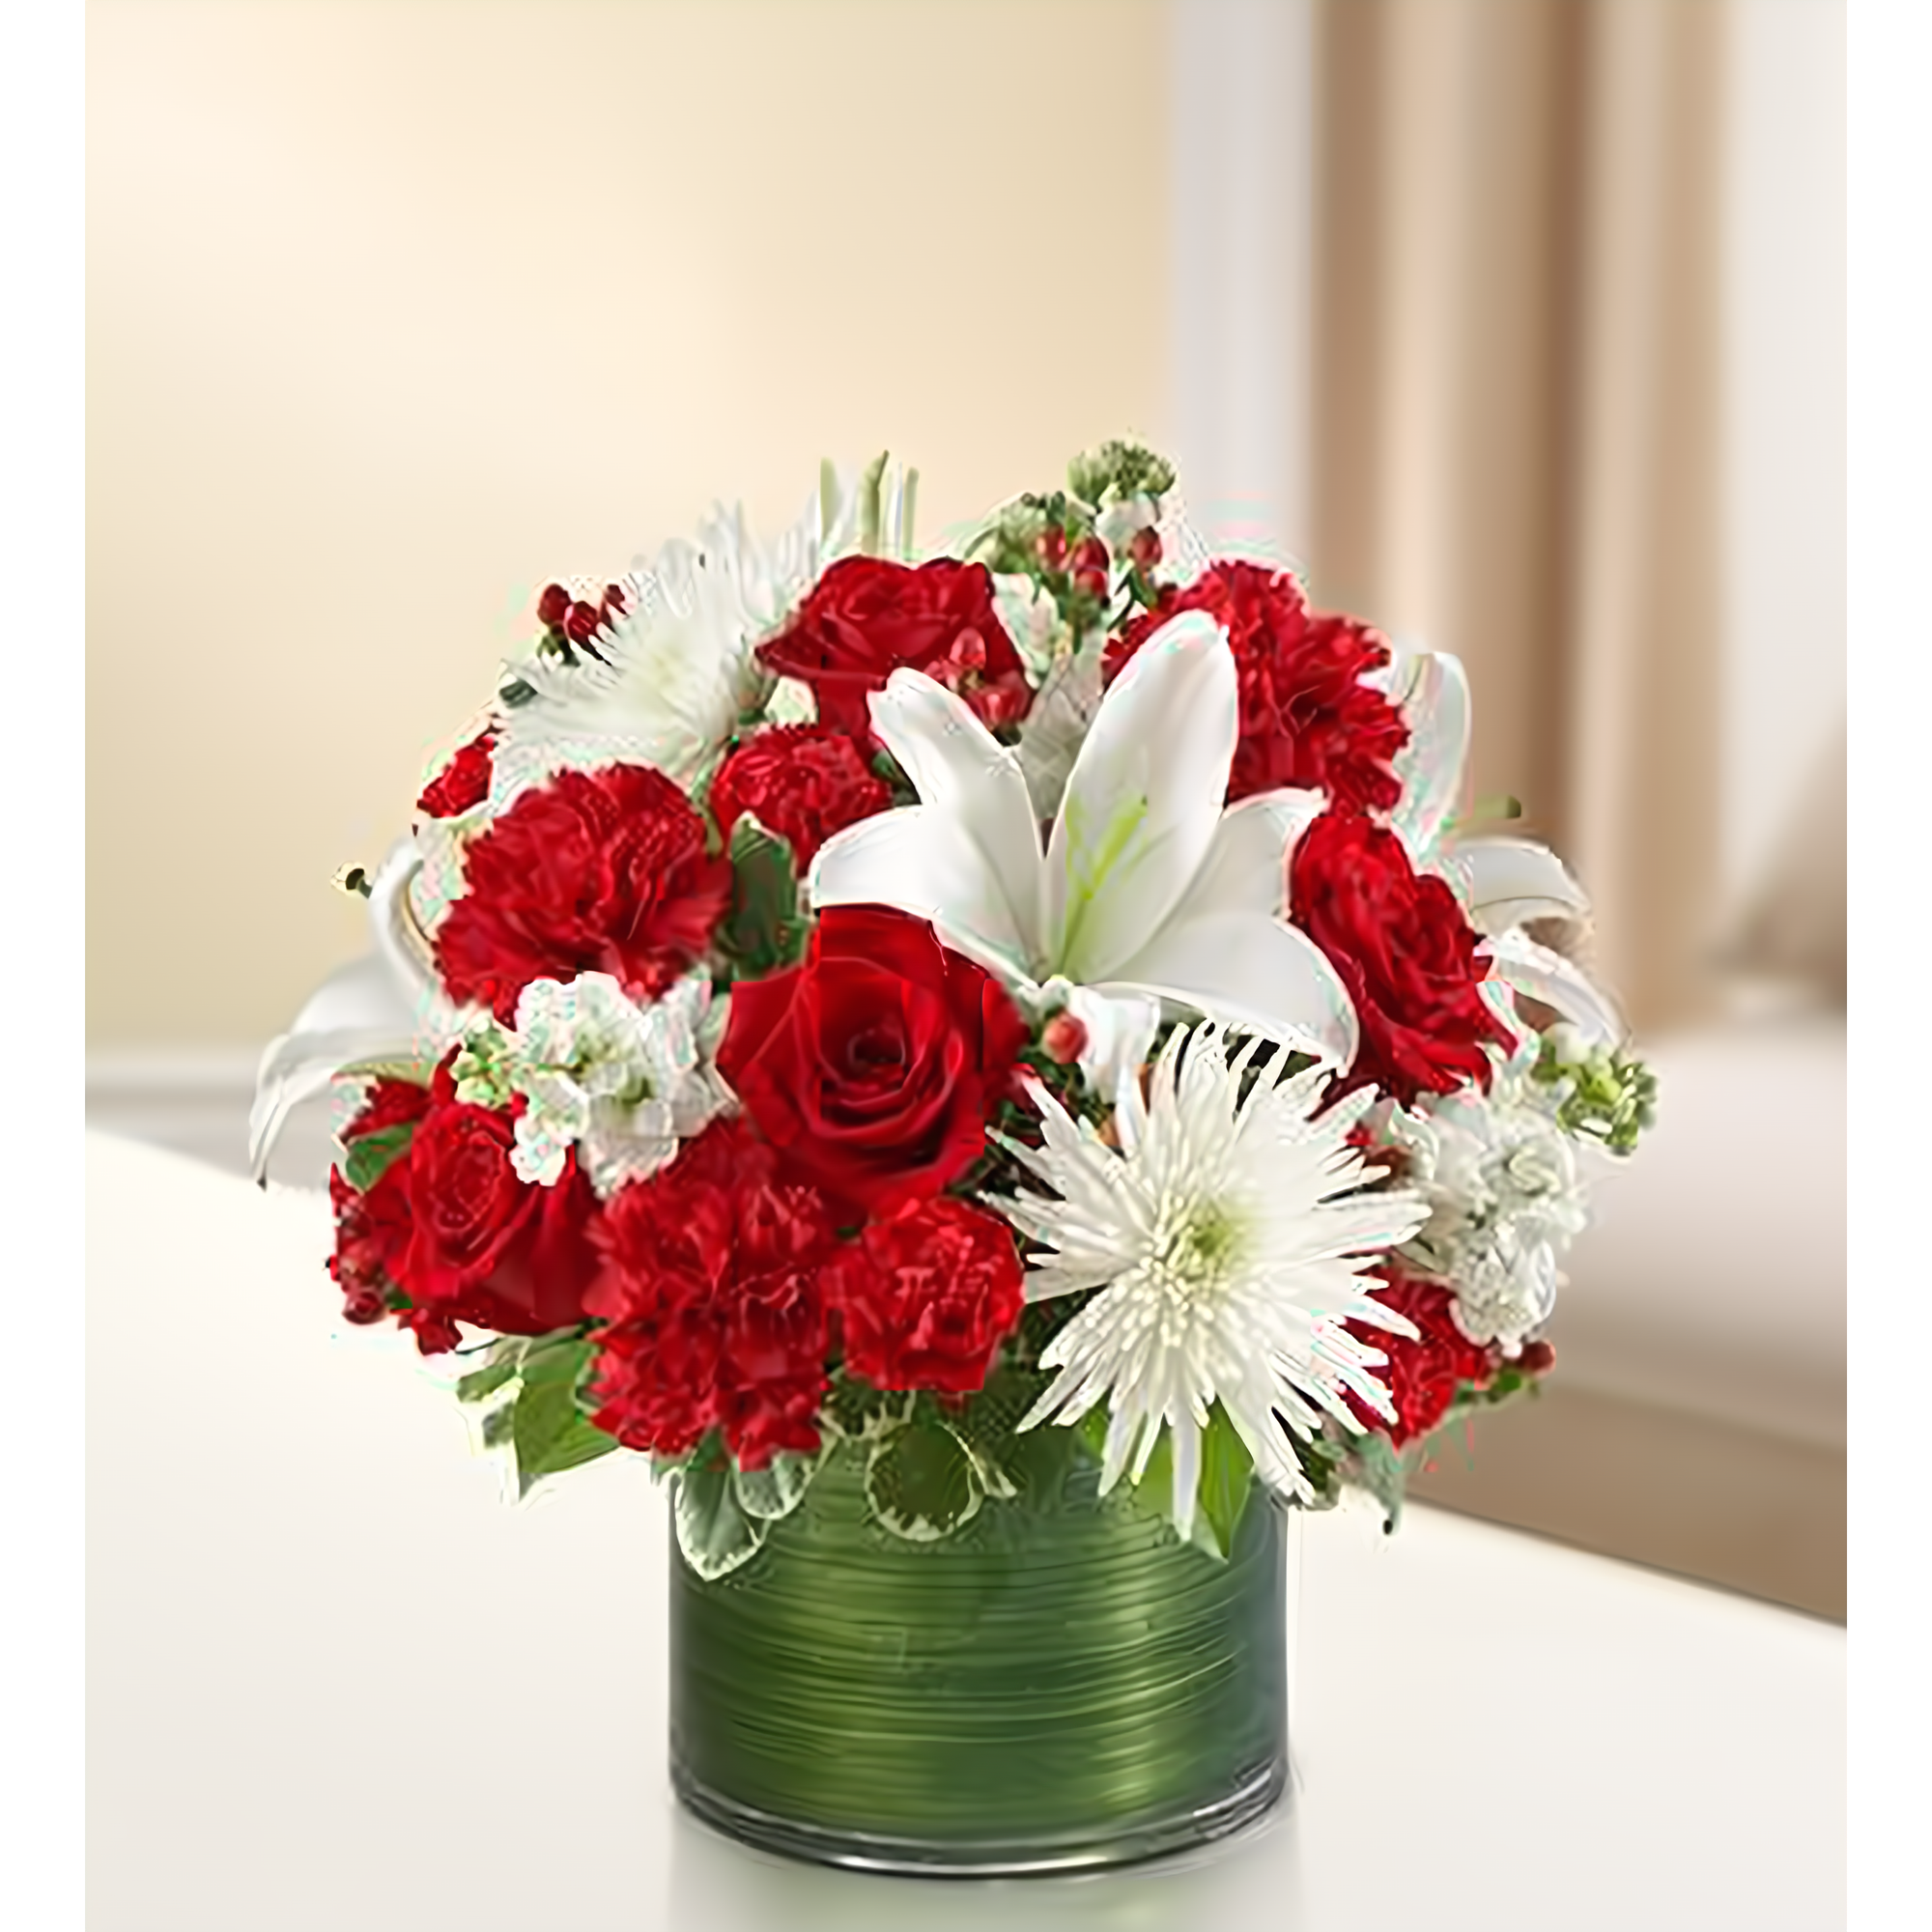 Cherished Memories - Red and White - Funeral > Vase Arrangements